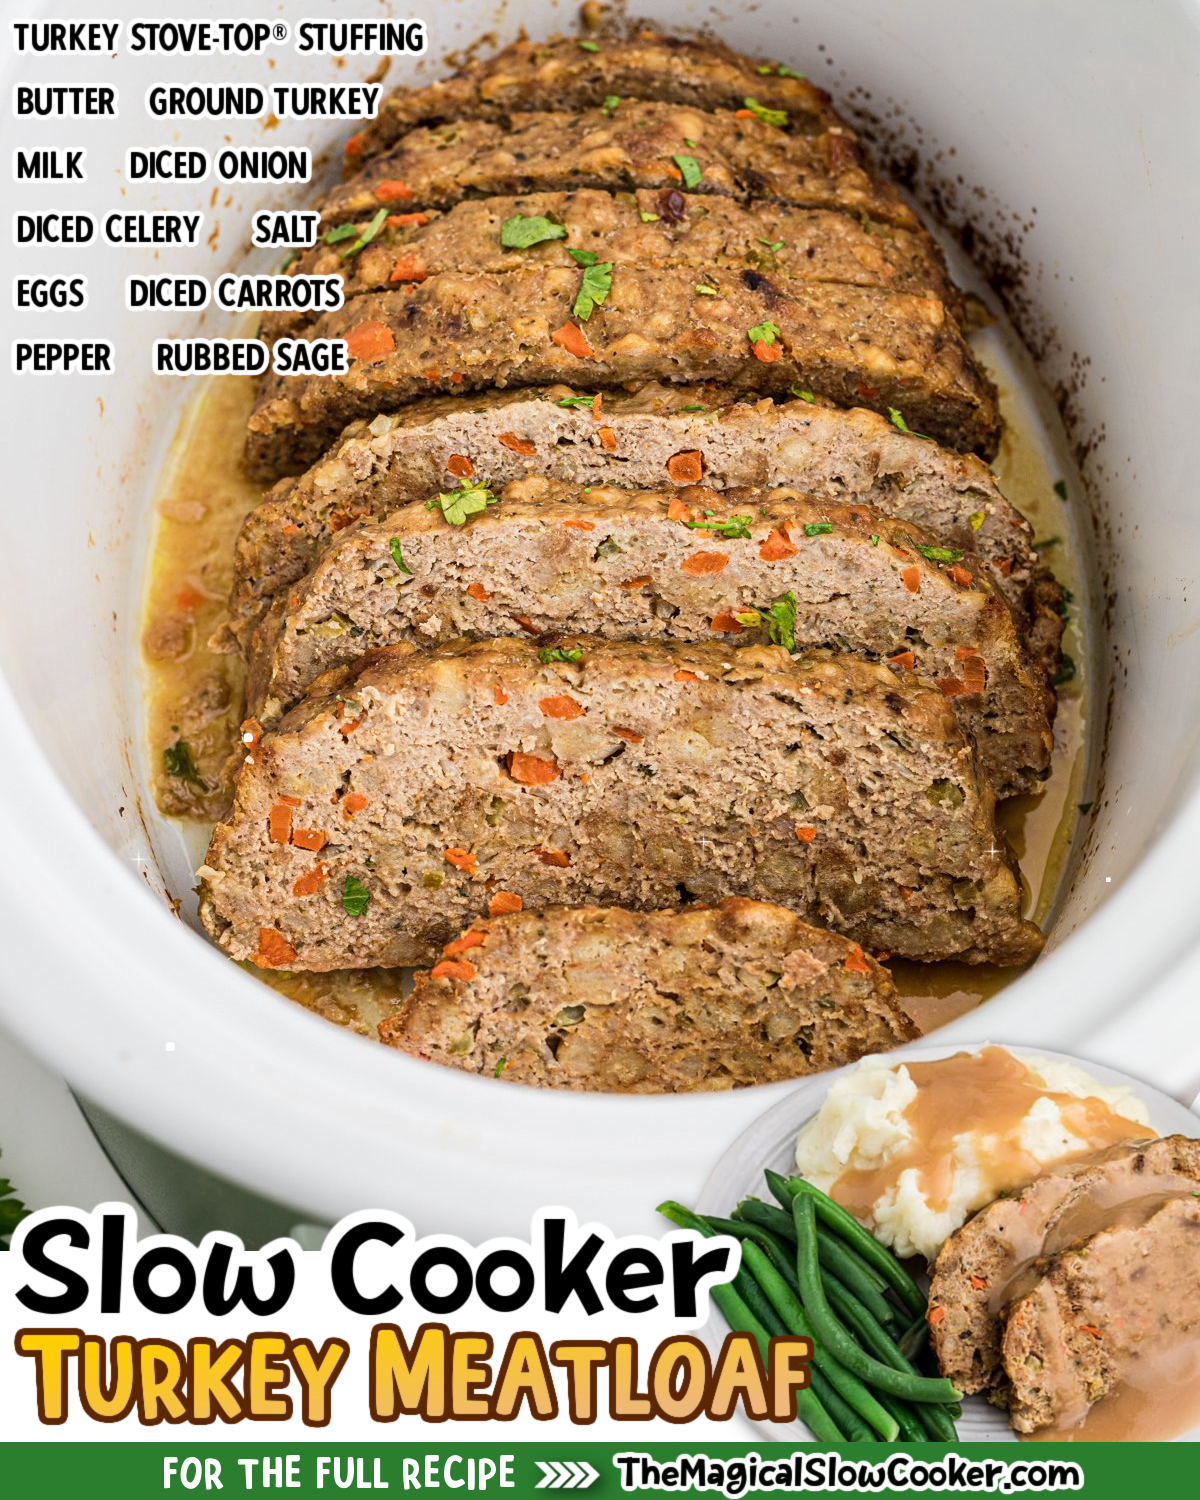 Turkey Meatloaf images with text of what the ingredients are for facebook.